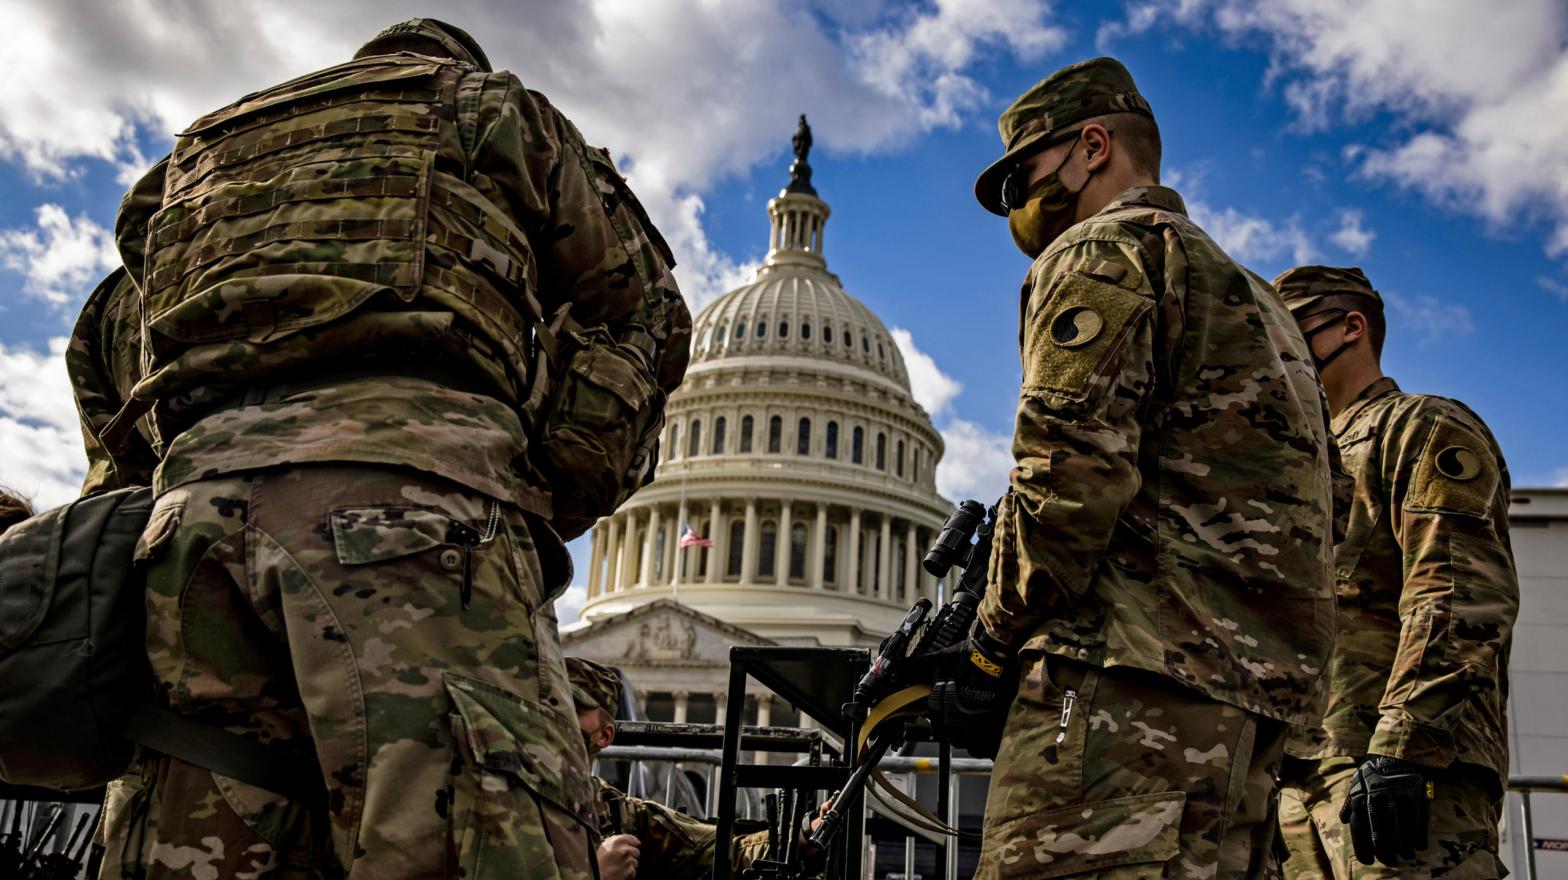 Virginia National Guard soldiers are issued their M4 rifles and live ammunition on the east front of the U.S. Capitol on January 17, 2021.  (Photo: Samuel Corum, Getty Images)